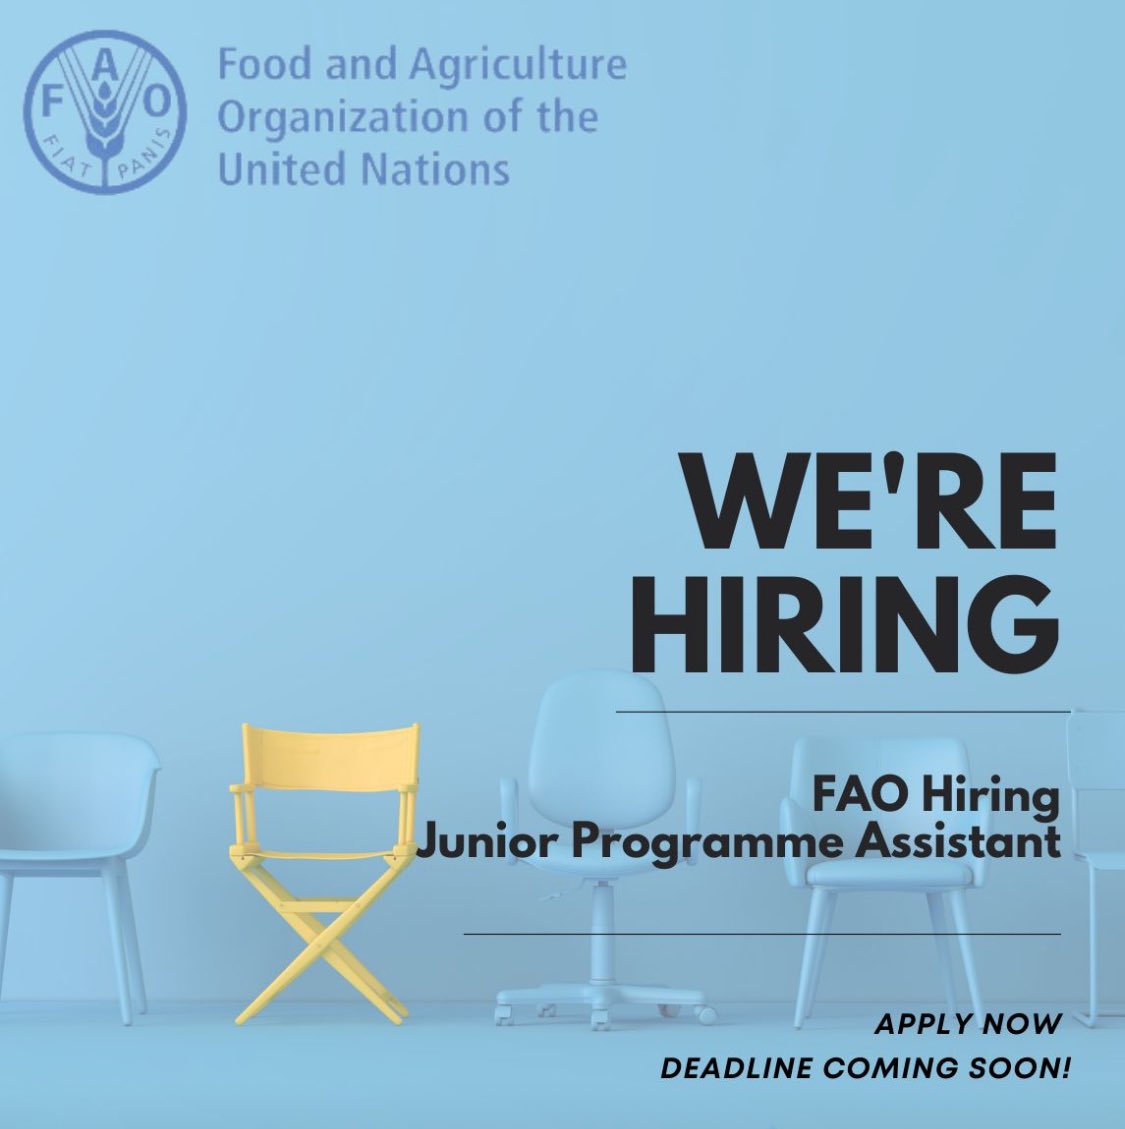 Calling All Candidates: FAO Hiring Junior Programme Assistant! lnkd.in/dPHejupR
Are you passionate about global development and sustainability? FAO is seeking a dedicated Junior Programme Assistant to join their team.
#FAO #JuniorProgrammeAssistant #GlobalDevelopment